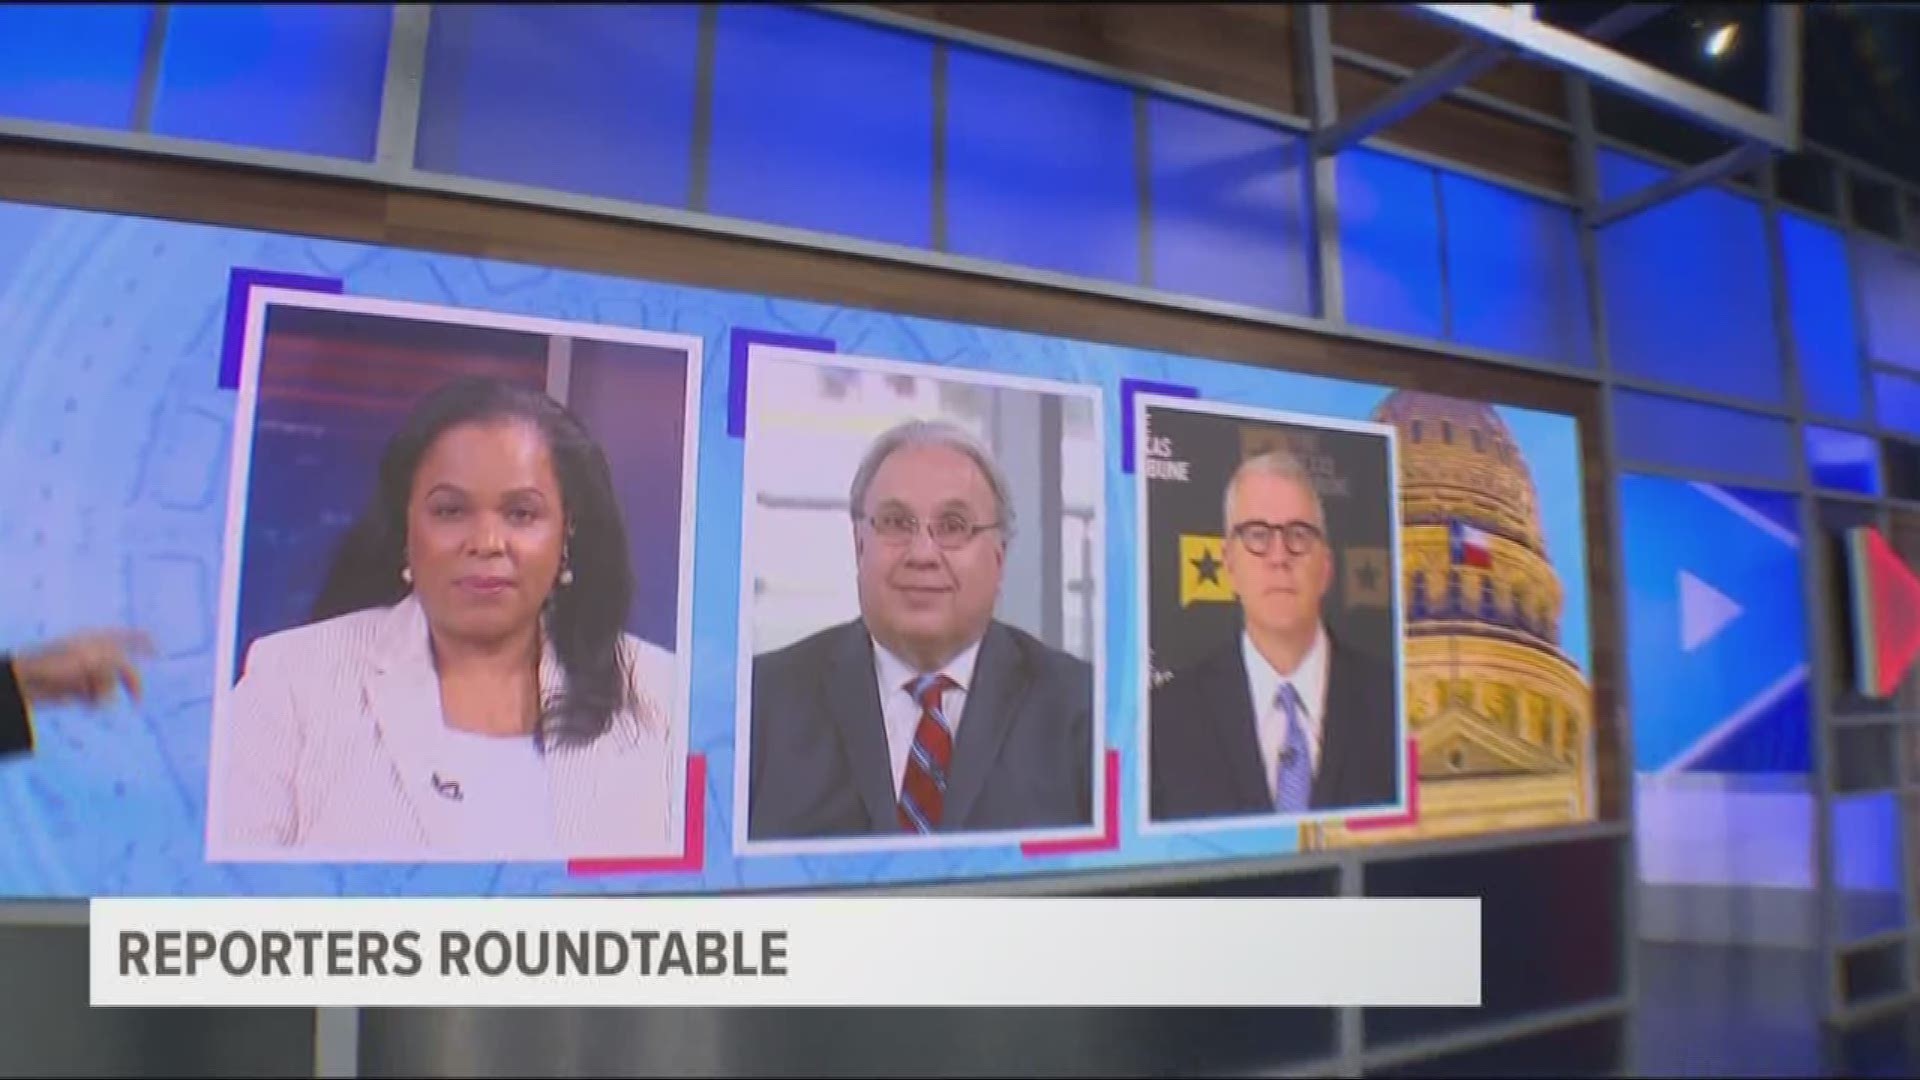 Reporters Roundtable puts the headlines in perspective each week. Host Jason, Bud and Ross returned along with Berna Dean Steptoe, WFAA's political producer. The three discussed the likelihood of a debate between incumbent Governor Greg Abbott and challen